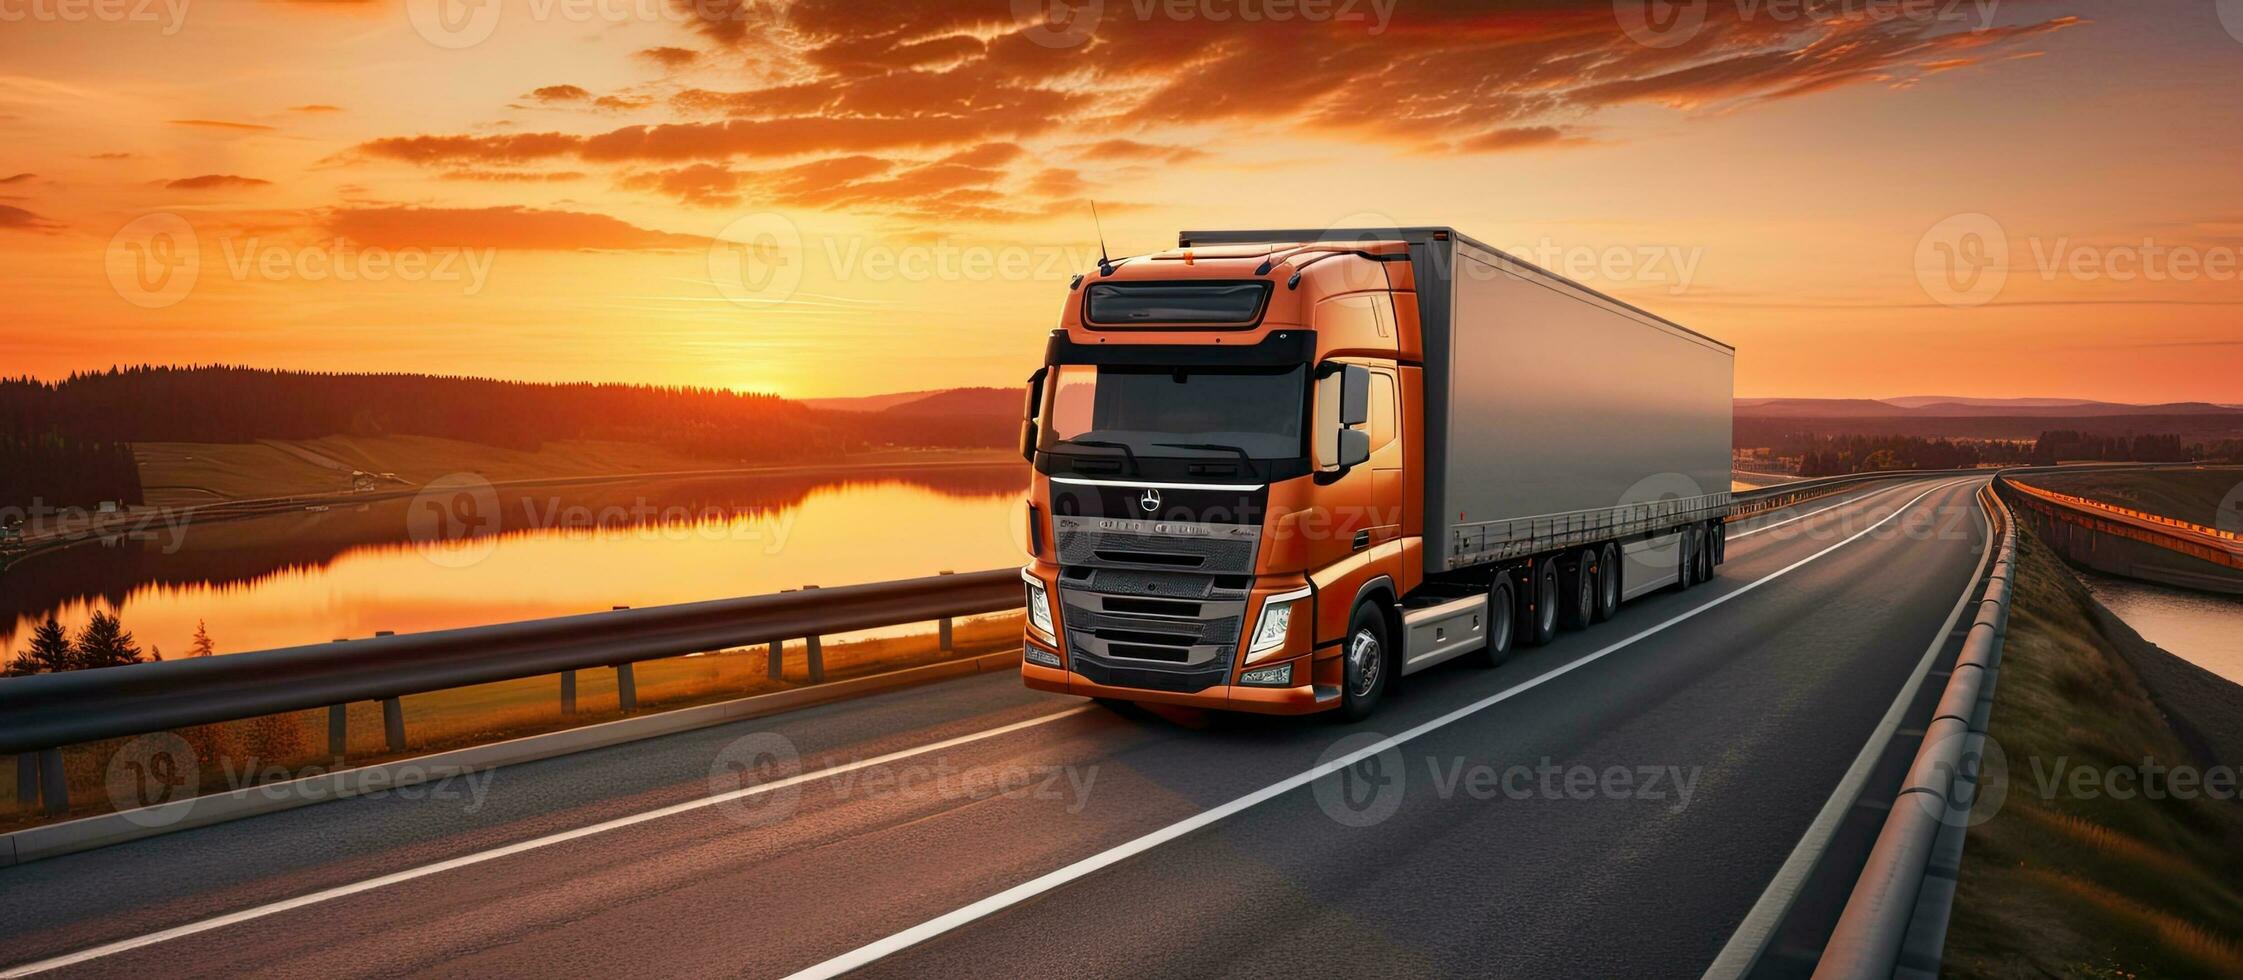 A truck with a trailer is driving on the motorway at night with an orange sunny sunset in the photo